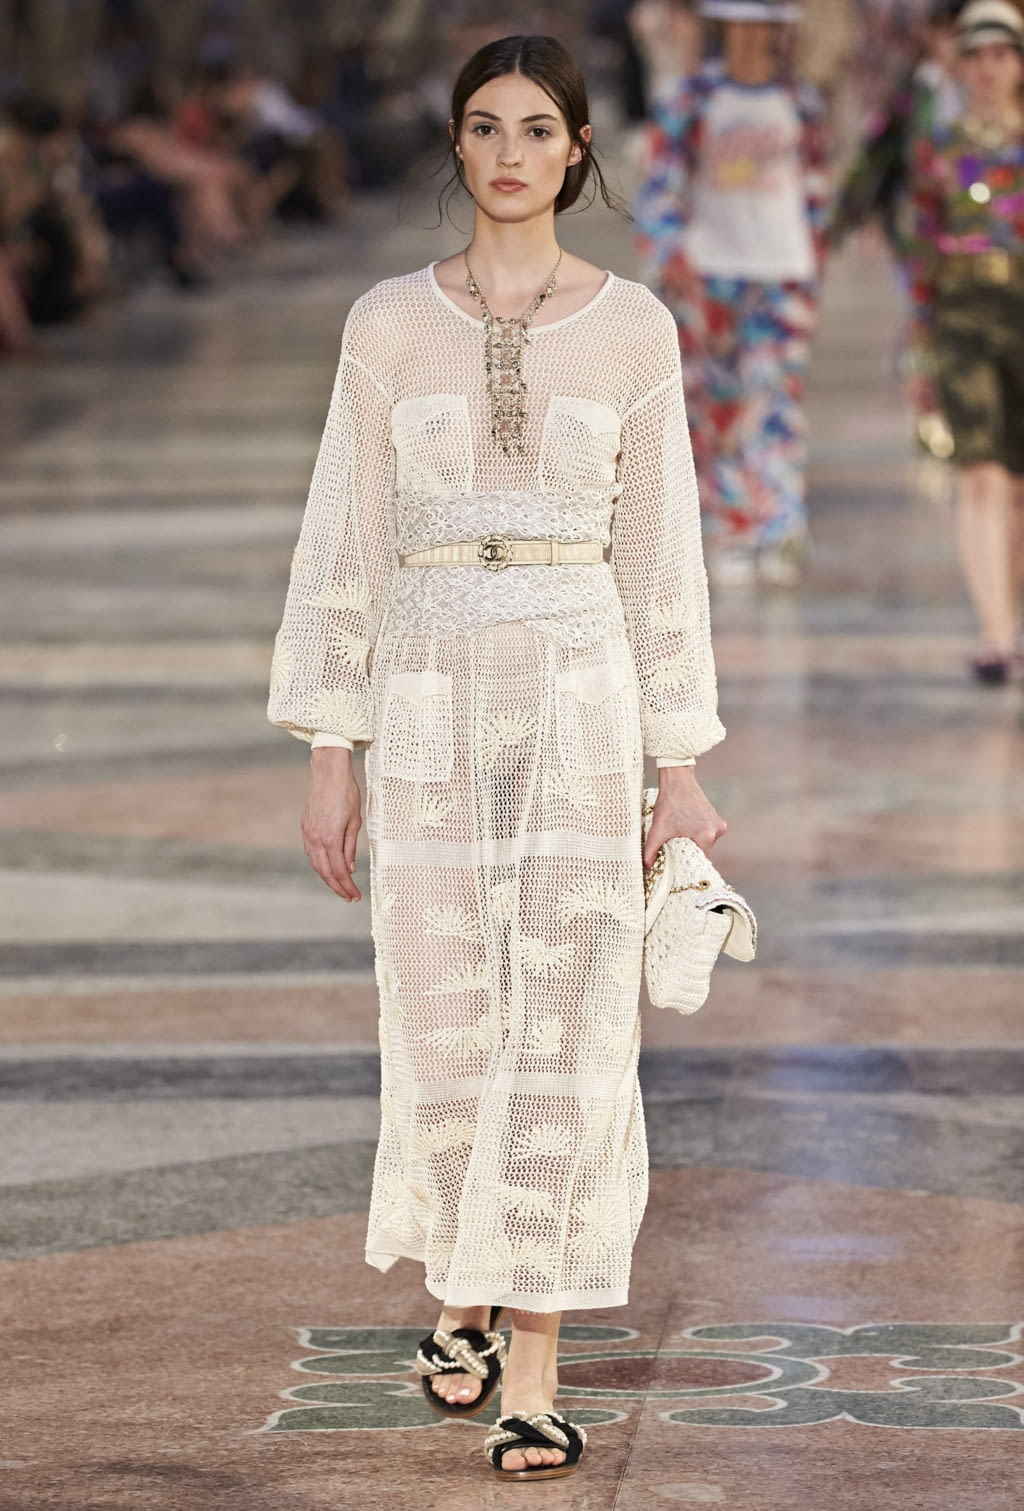 Chanel Resort 2017 Collection